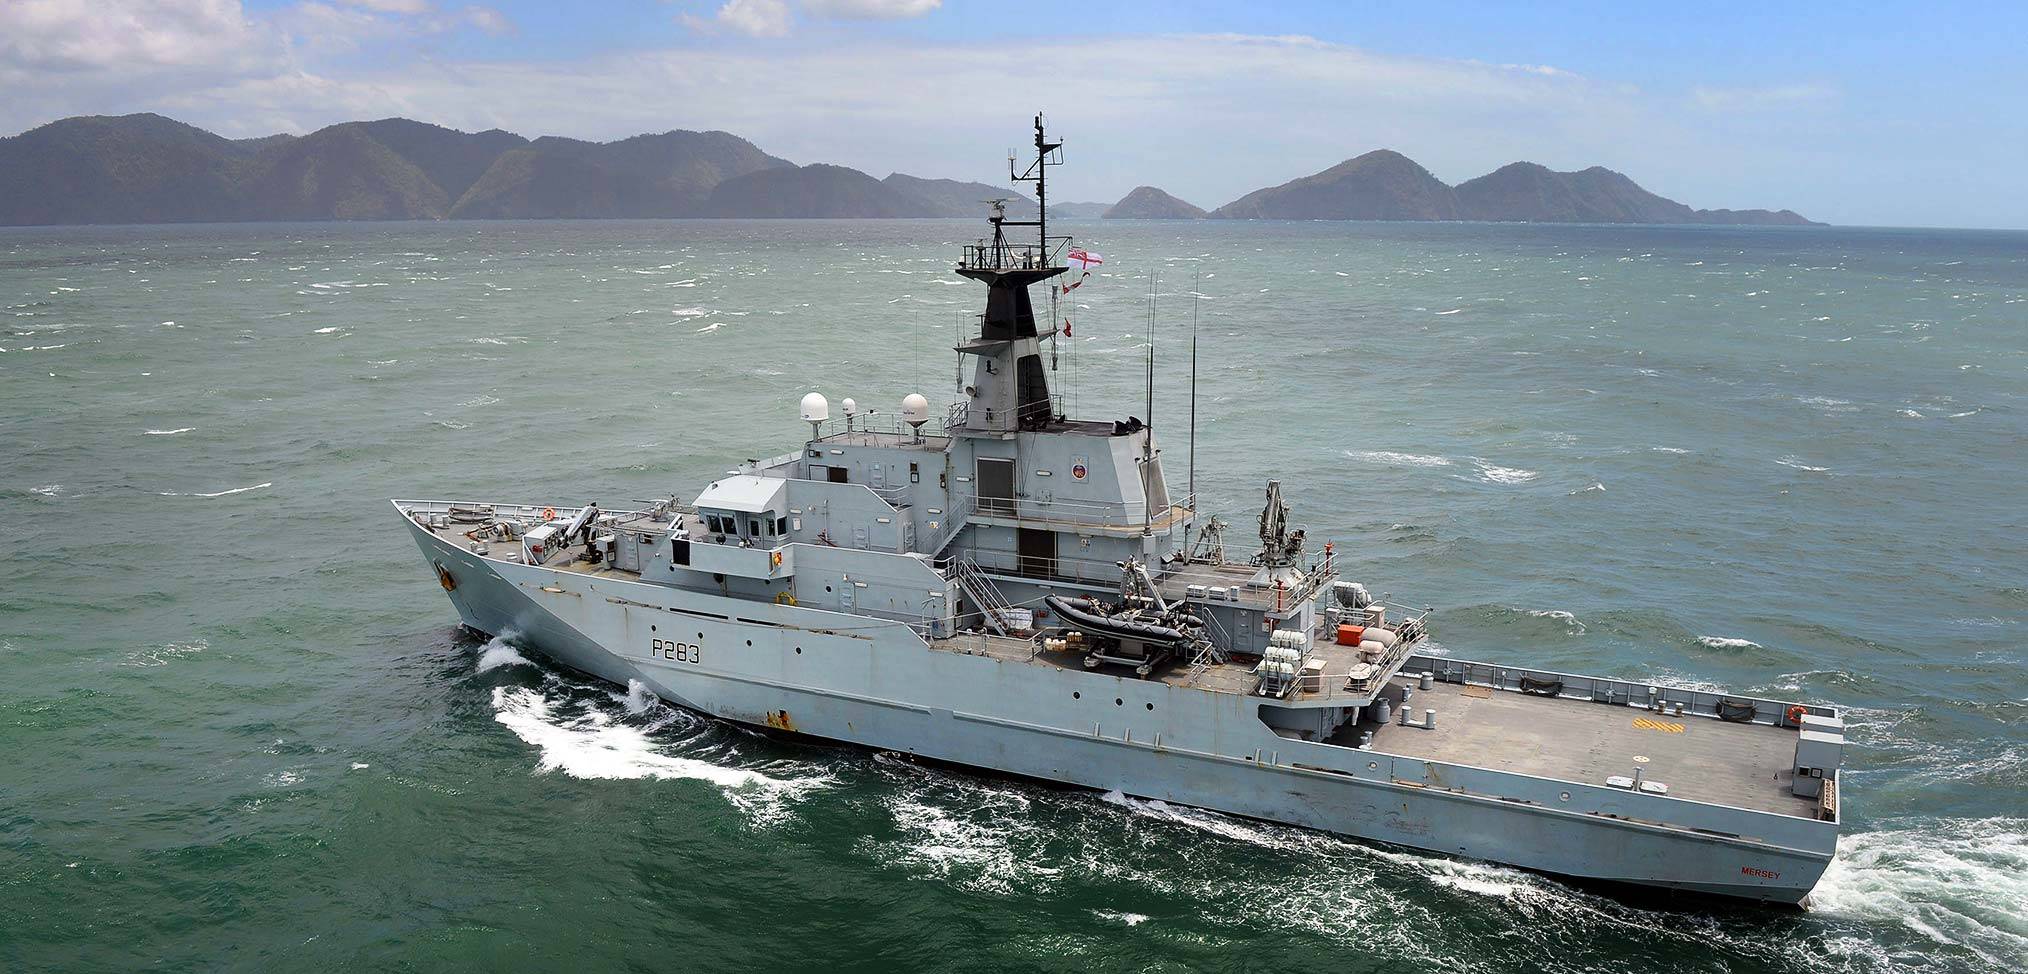 In focus: the Royal Navy presence in the Caribbean